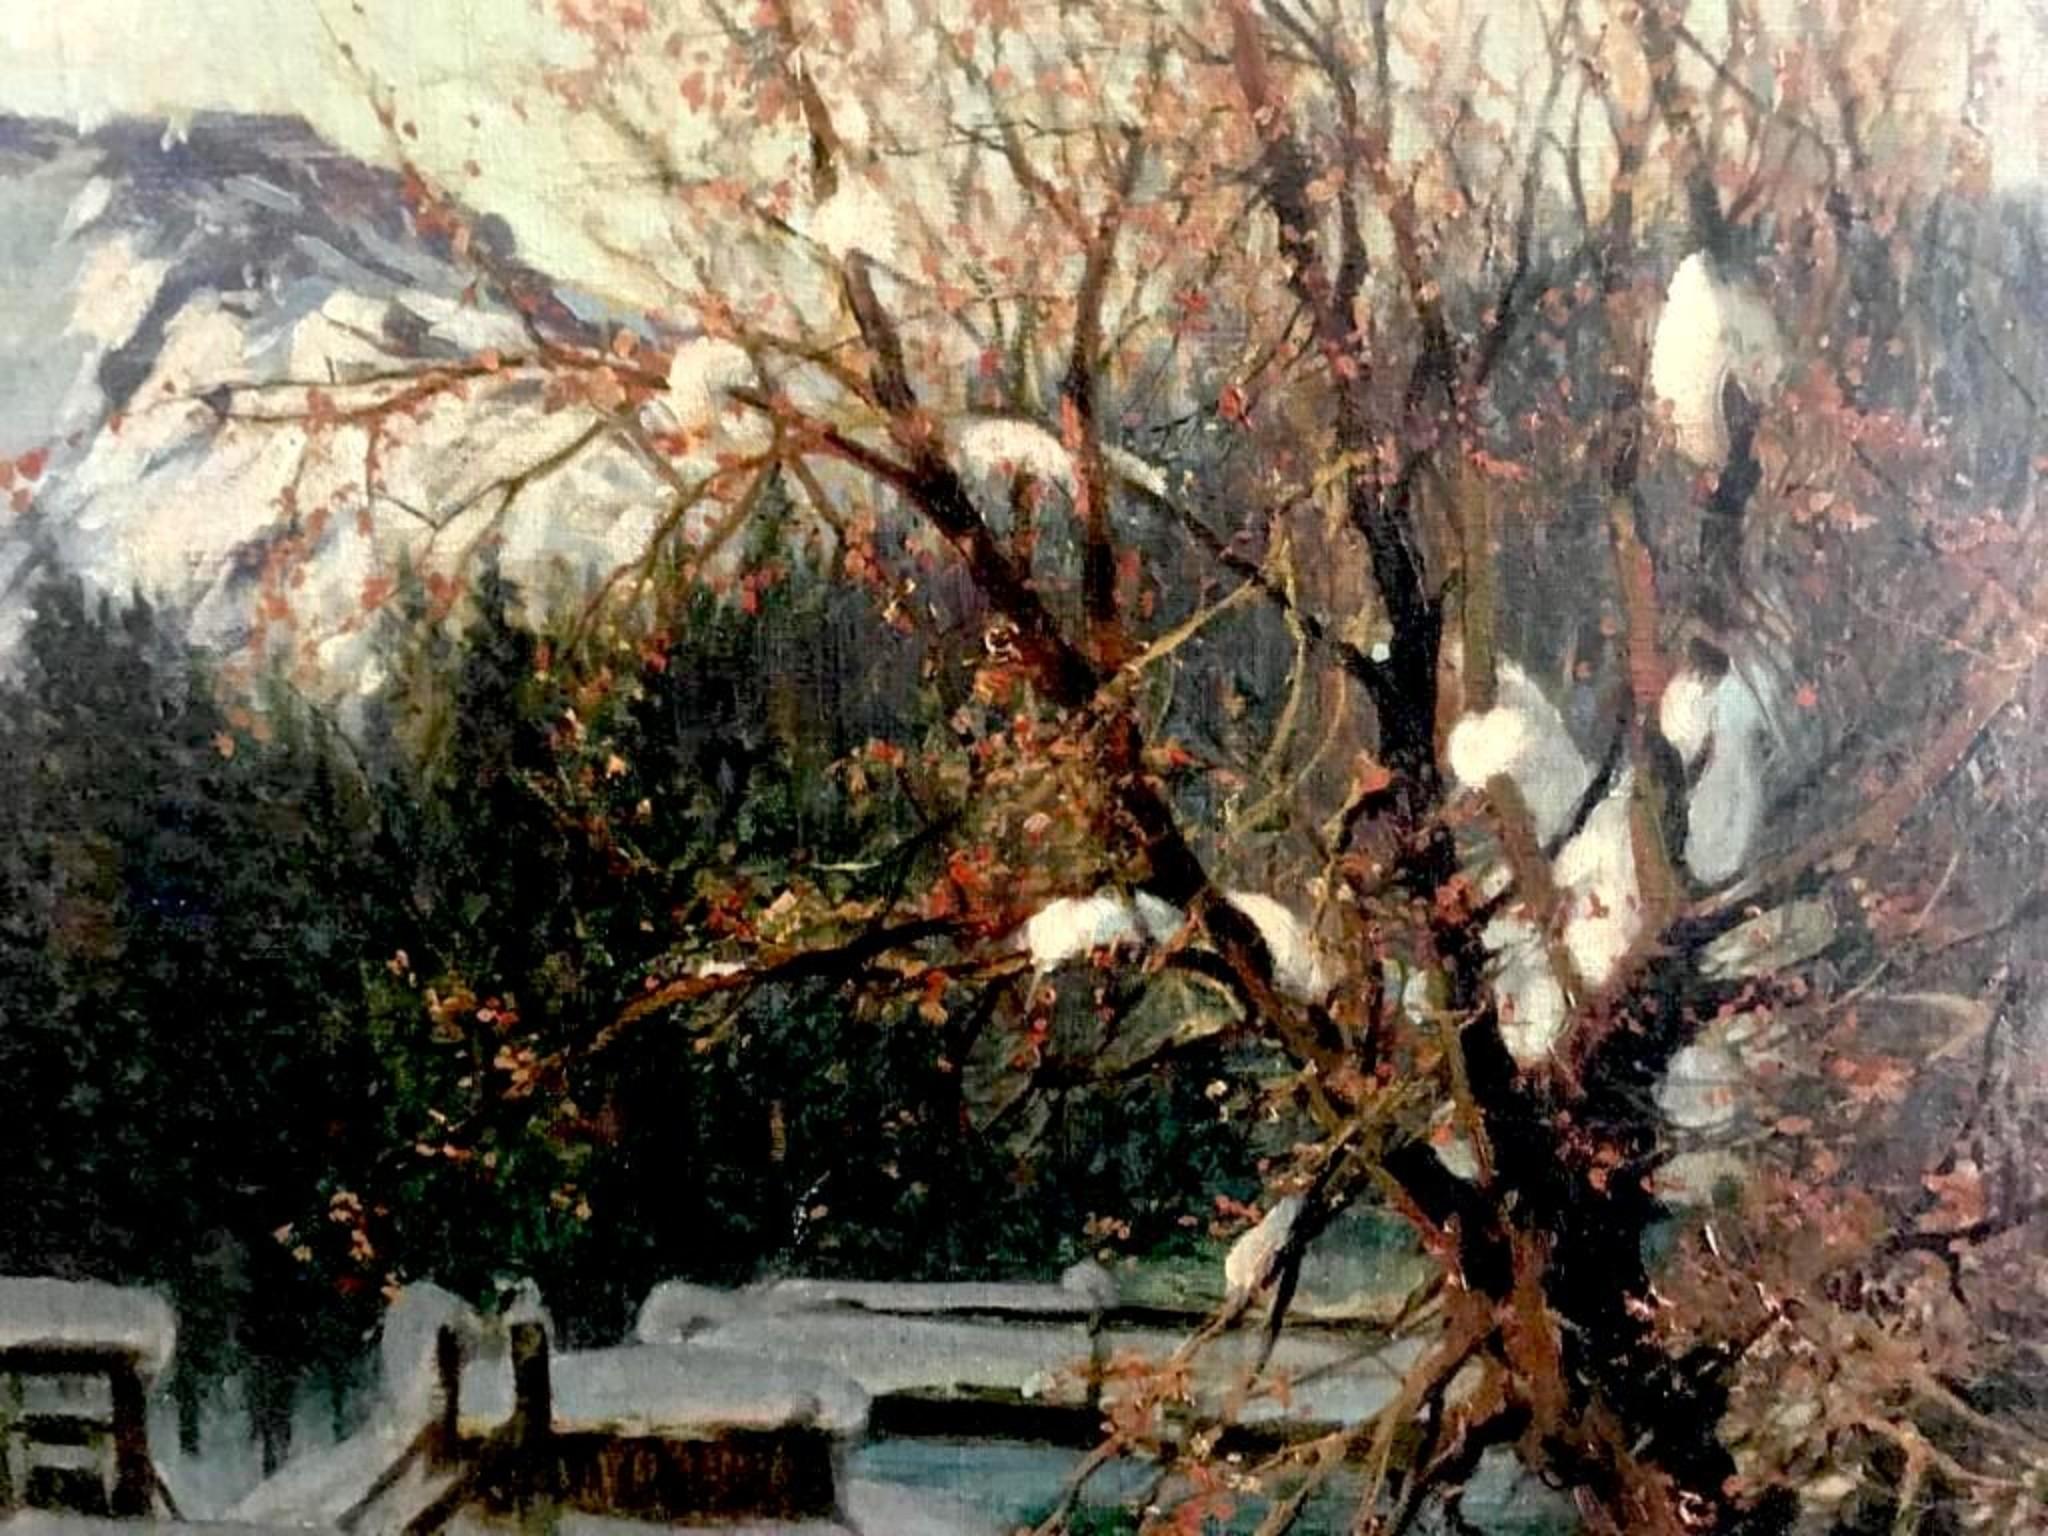 KARL LUDWIG PRINZ (1875-1944) 
Winter Landscape
​​​​Oil on canvas. Signed. Framed. 
Size: 32 inches (h)x 39 inches (w) canvas.
40 inches (h) x 48 inches (w) frame. 

PROVENANCE: Bought in KARL LOCHER GALLERY WIEN. on 31 July 1953

BIO: Prinz was